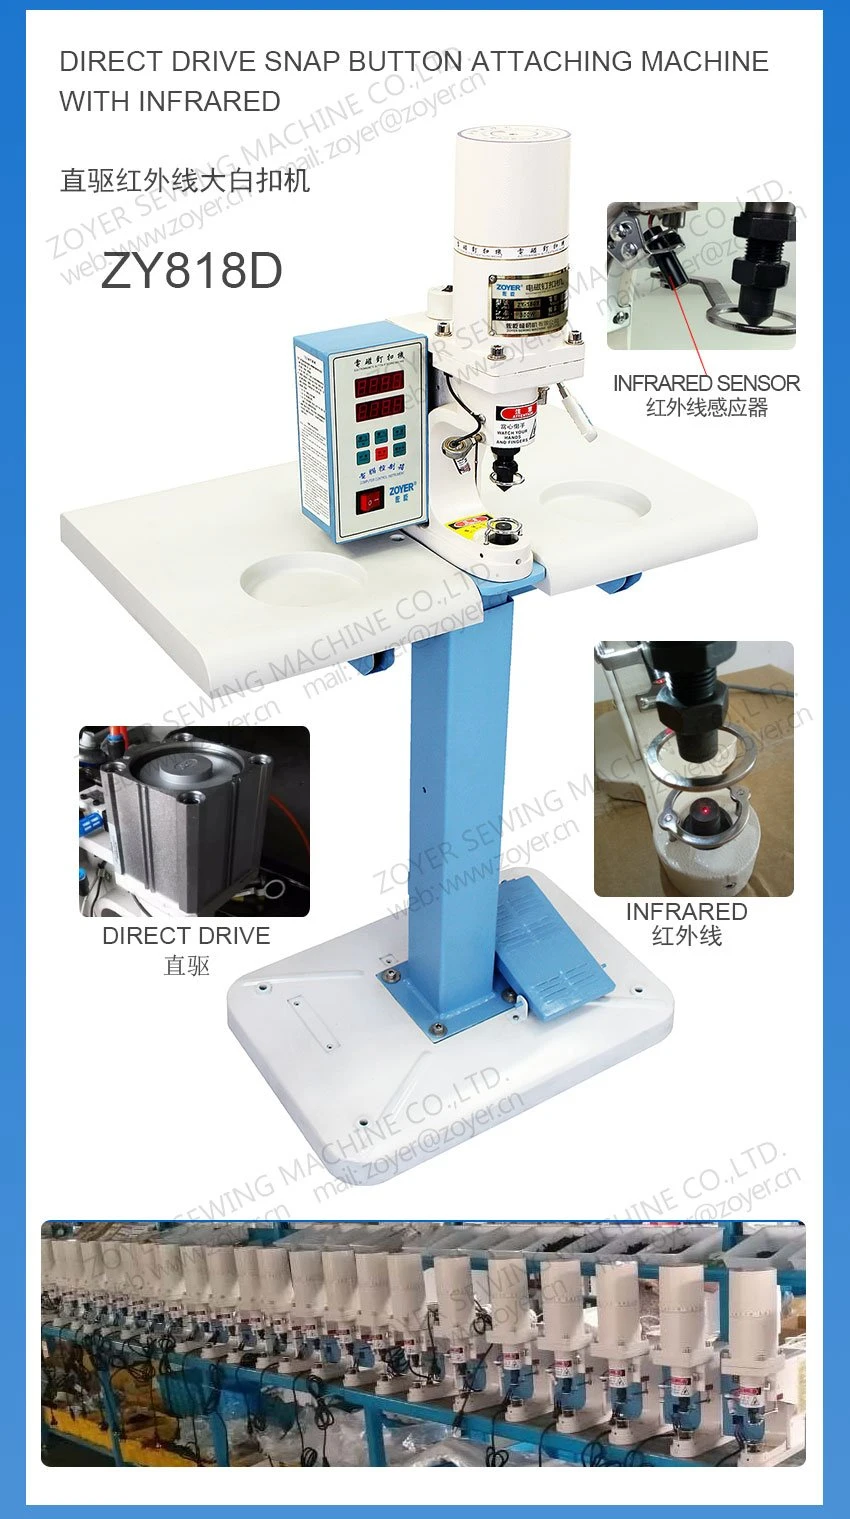 Zy828d Automatic Direct Drive Snap Button Attaching Machine with Infrared